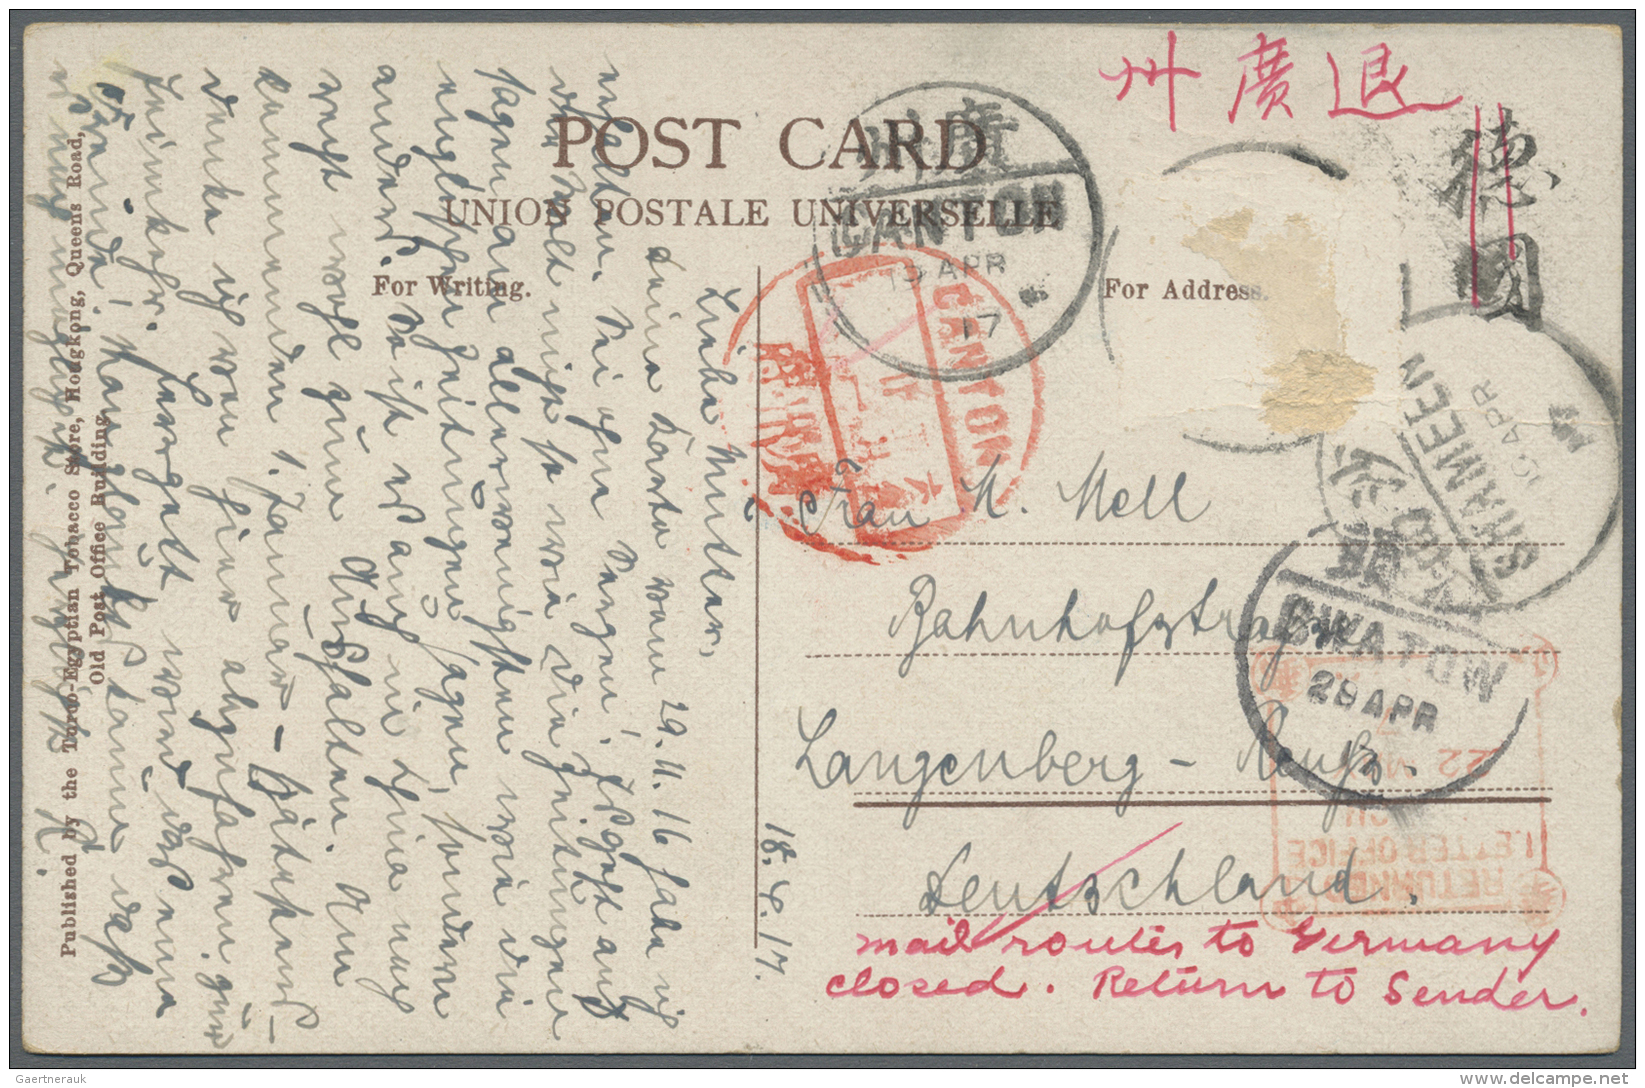 China: 1917, Ppc "Canton New Bund" Used "SHAMEEN 4 APR 17" To Germany, Via Canton And Swatow, But Then Returned W. Red M - Covers & Documents